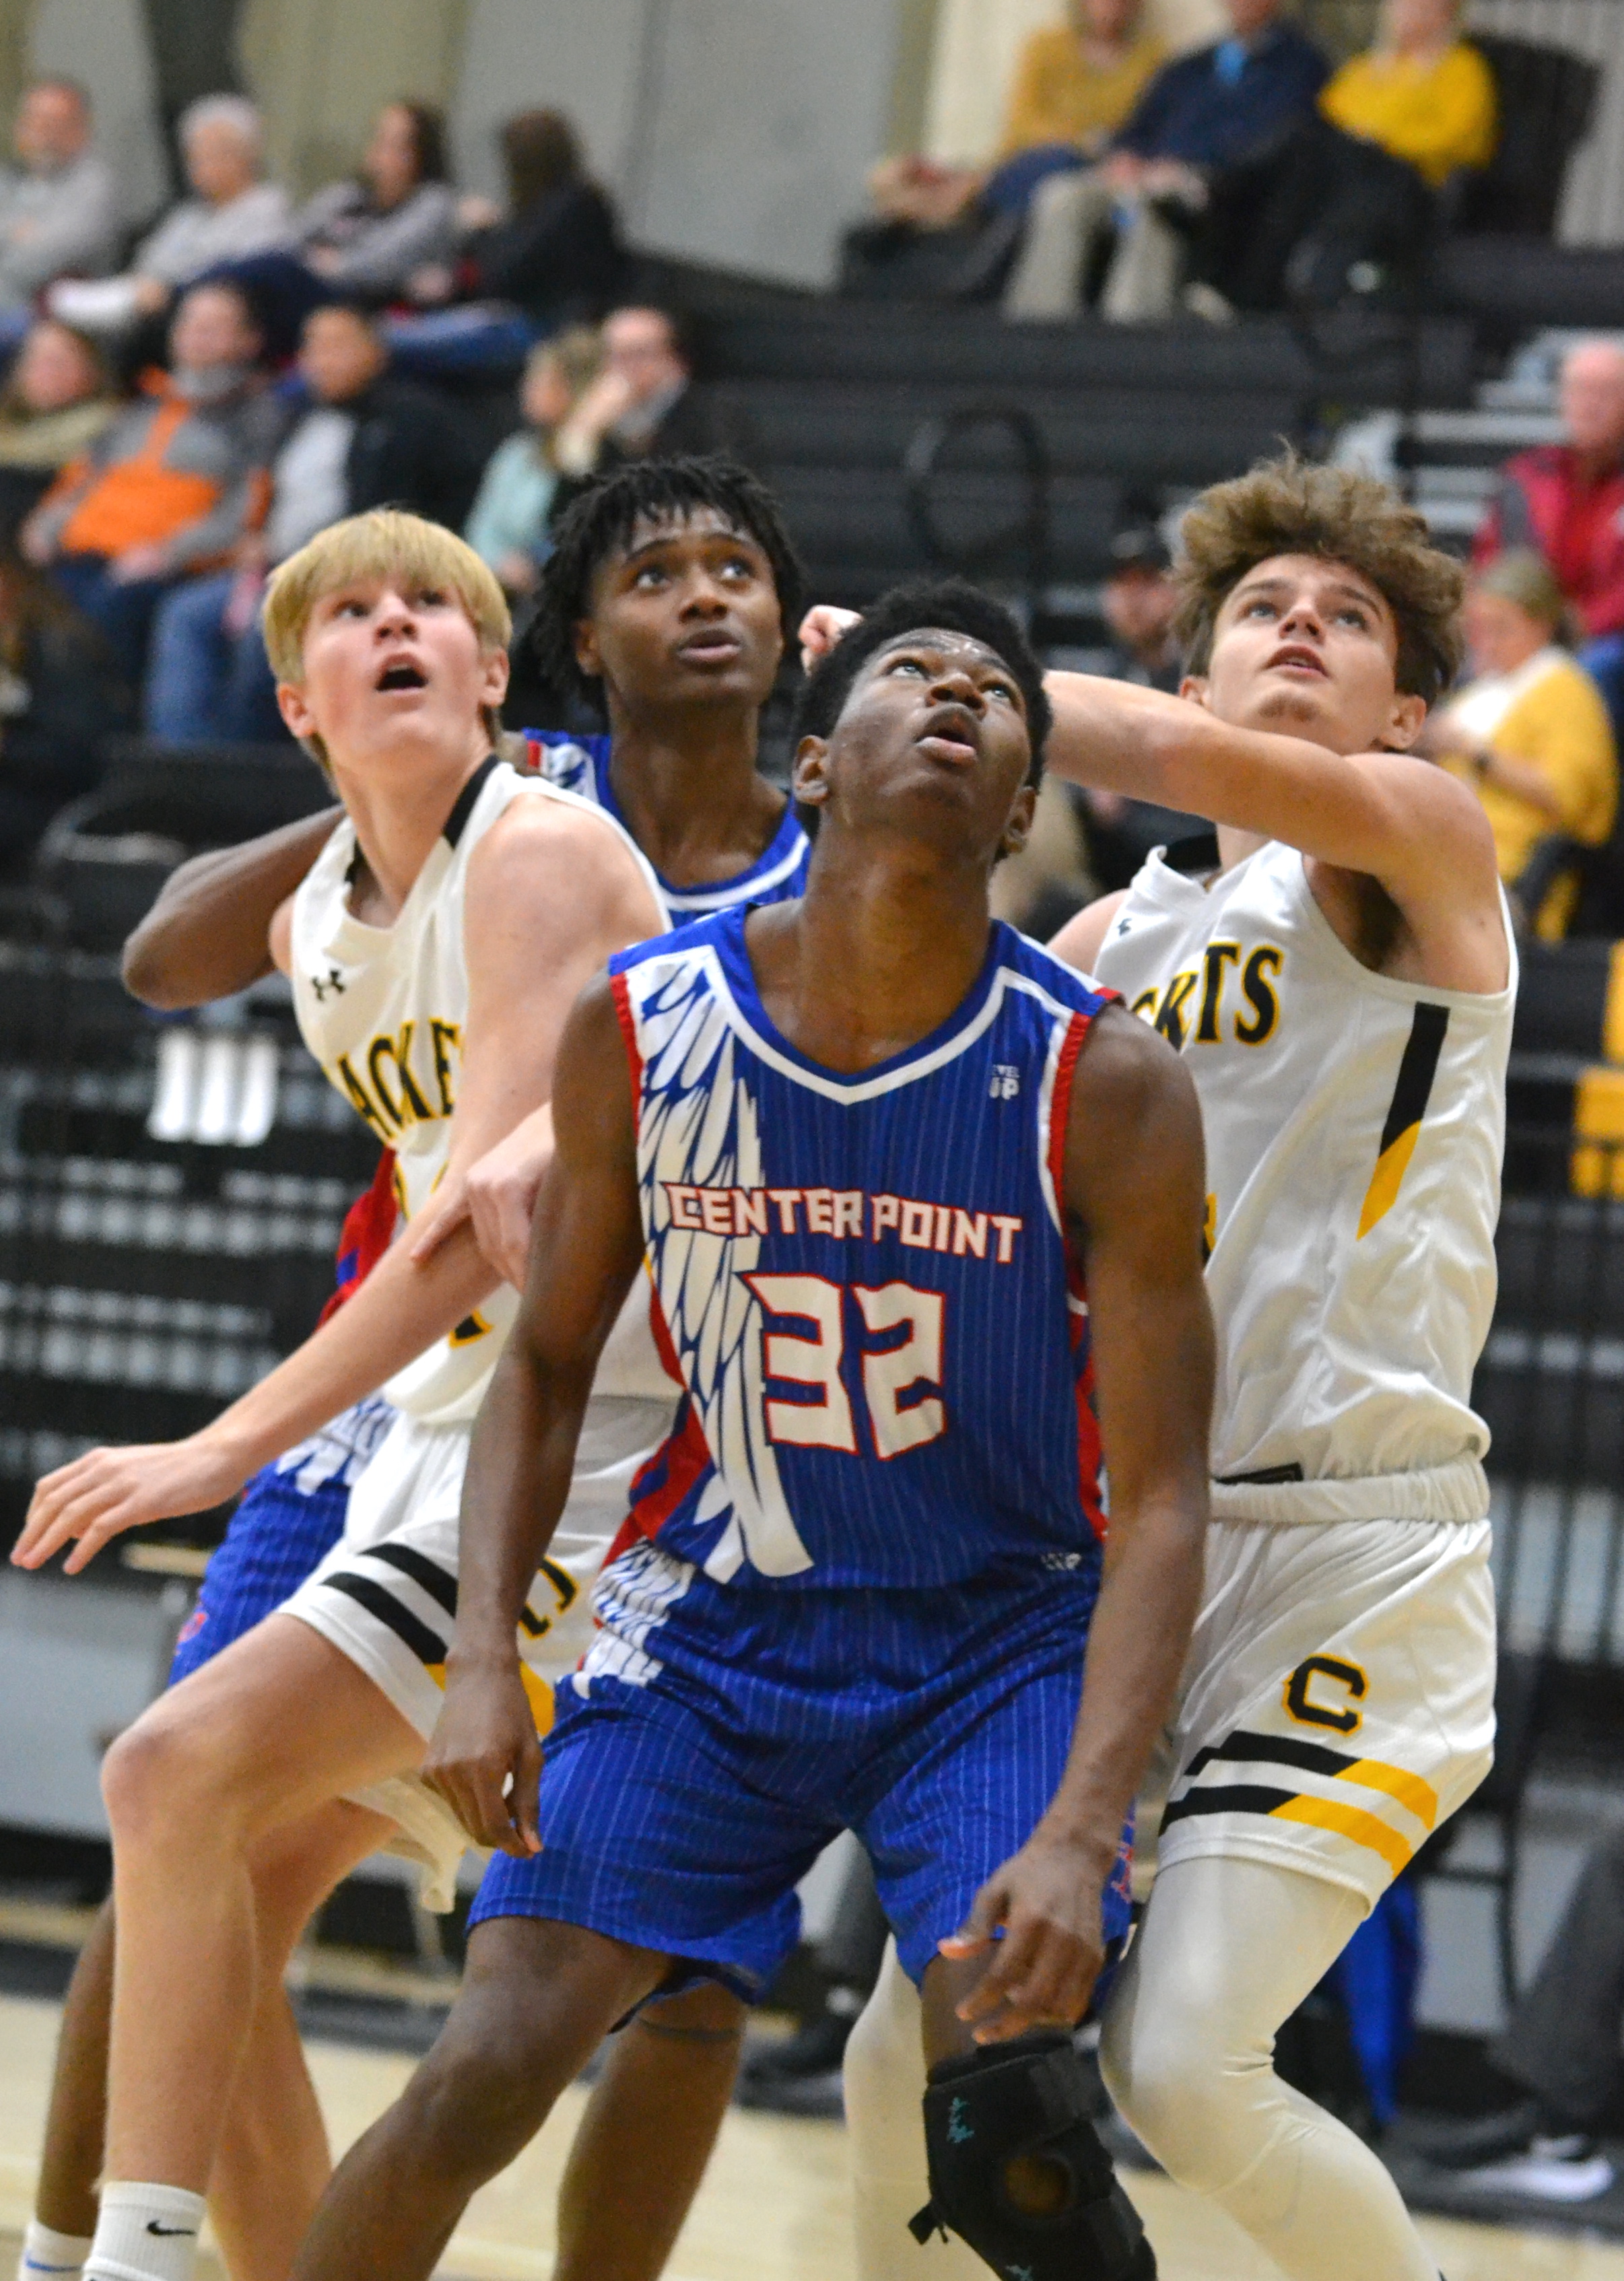 Basketball rankings: See where local teams stand in updated ASWA poll